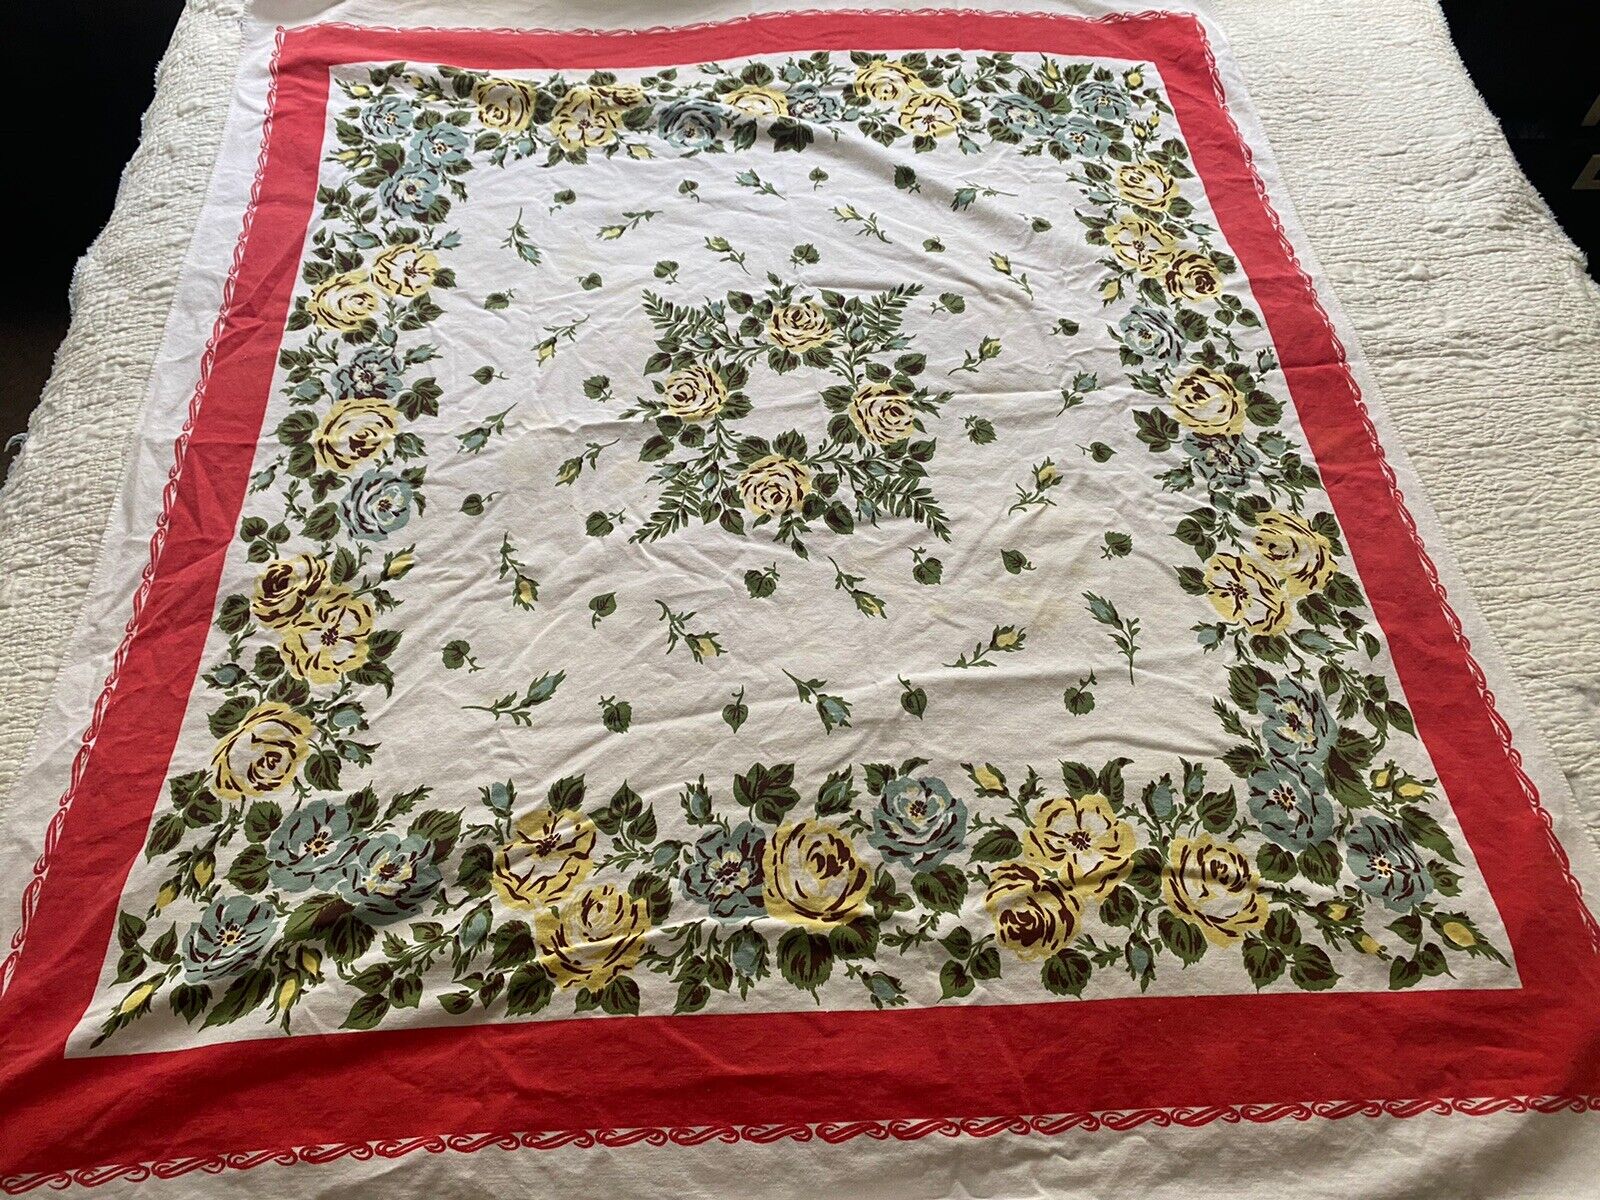 Vintage Floral Tablecloth 44 X 48  Red Trim 1950s   READ